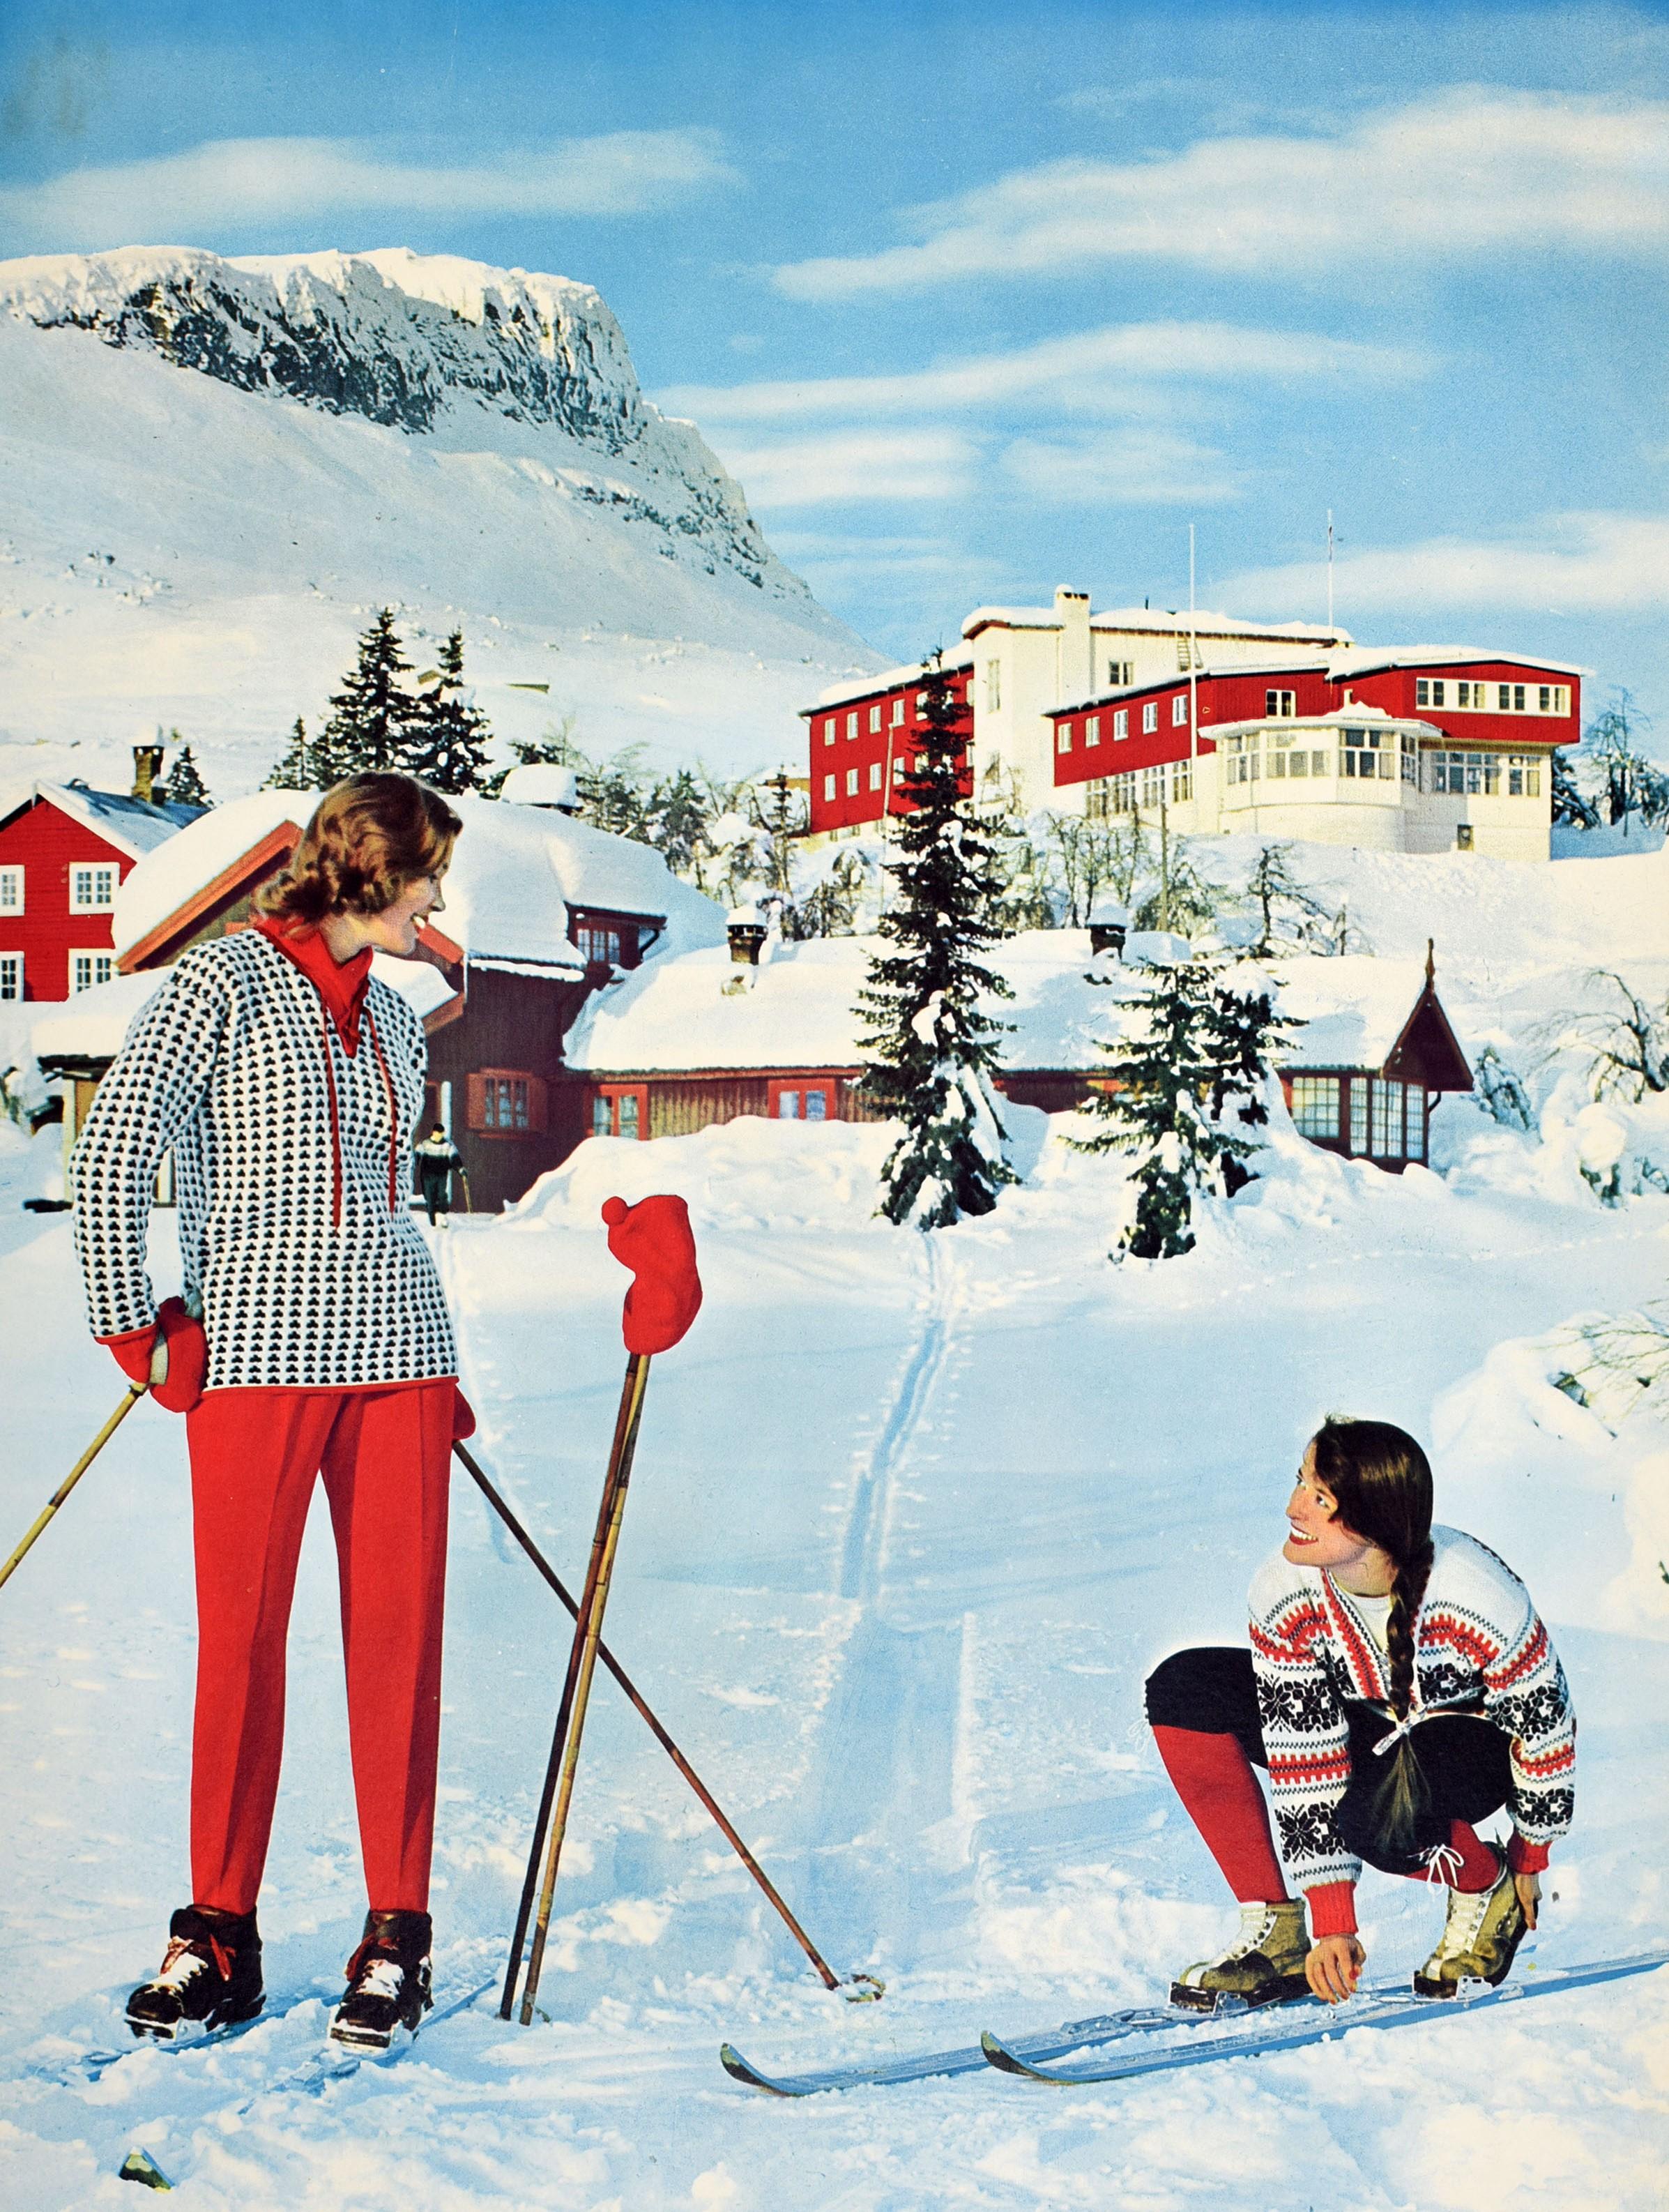 Original Vintage Railway Travel Poster Ski Norway Winter Sport Mountain Skiers In Fair Condition For Sale In London, GB